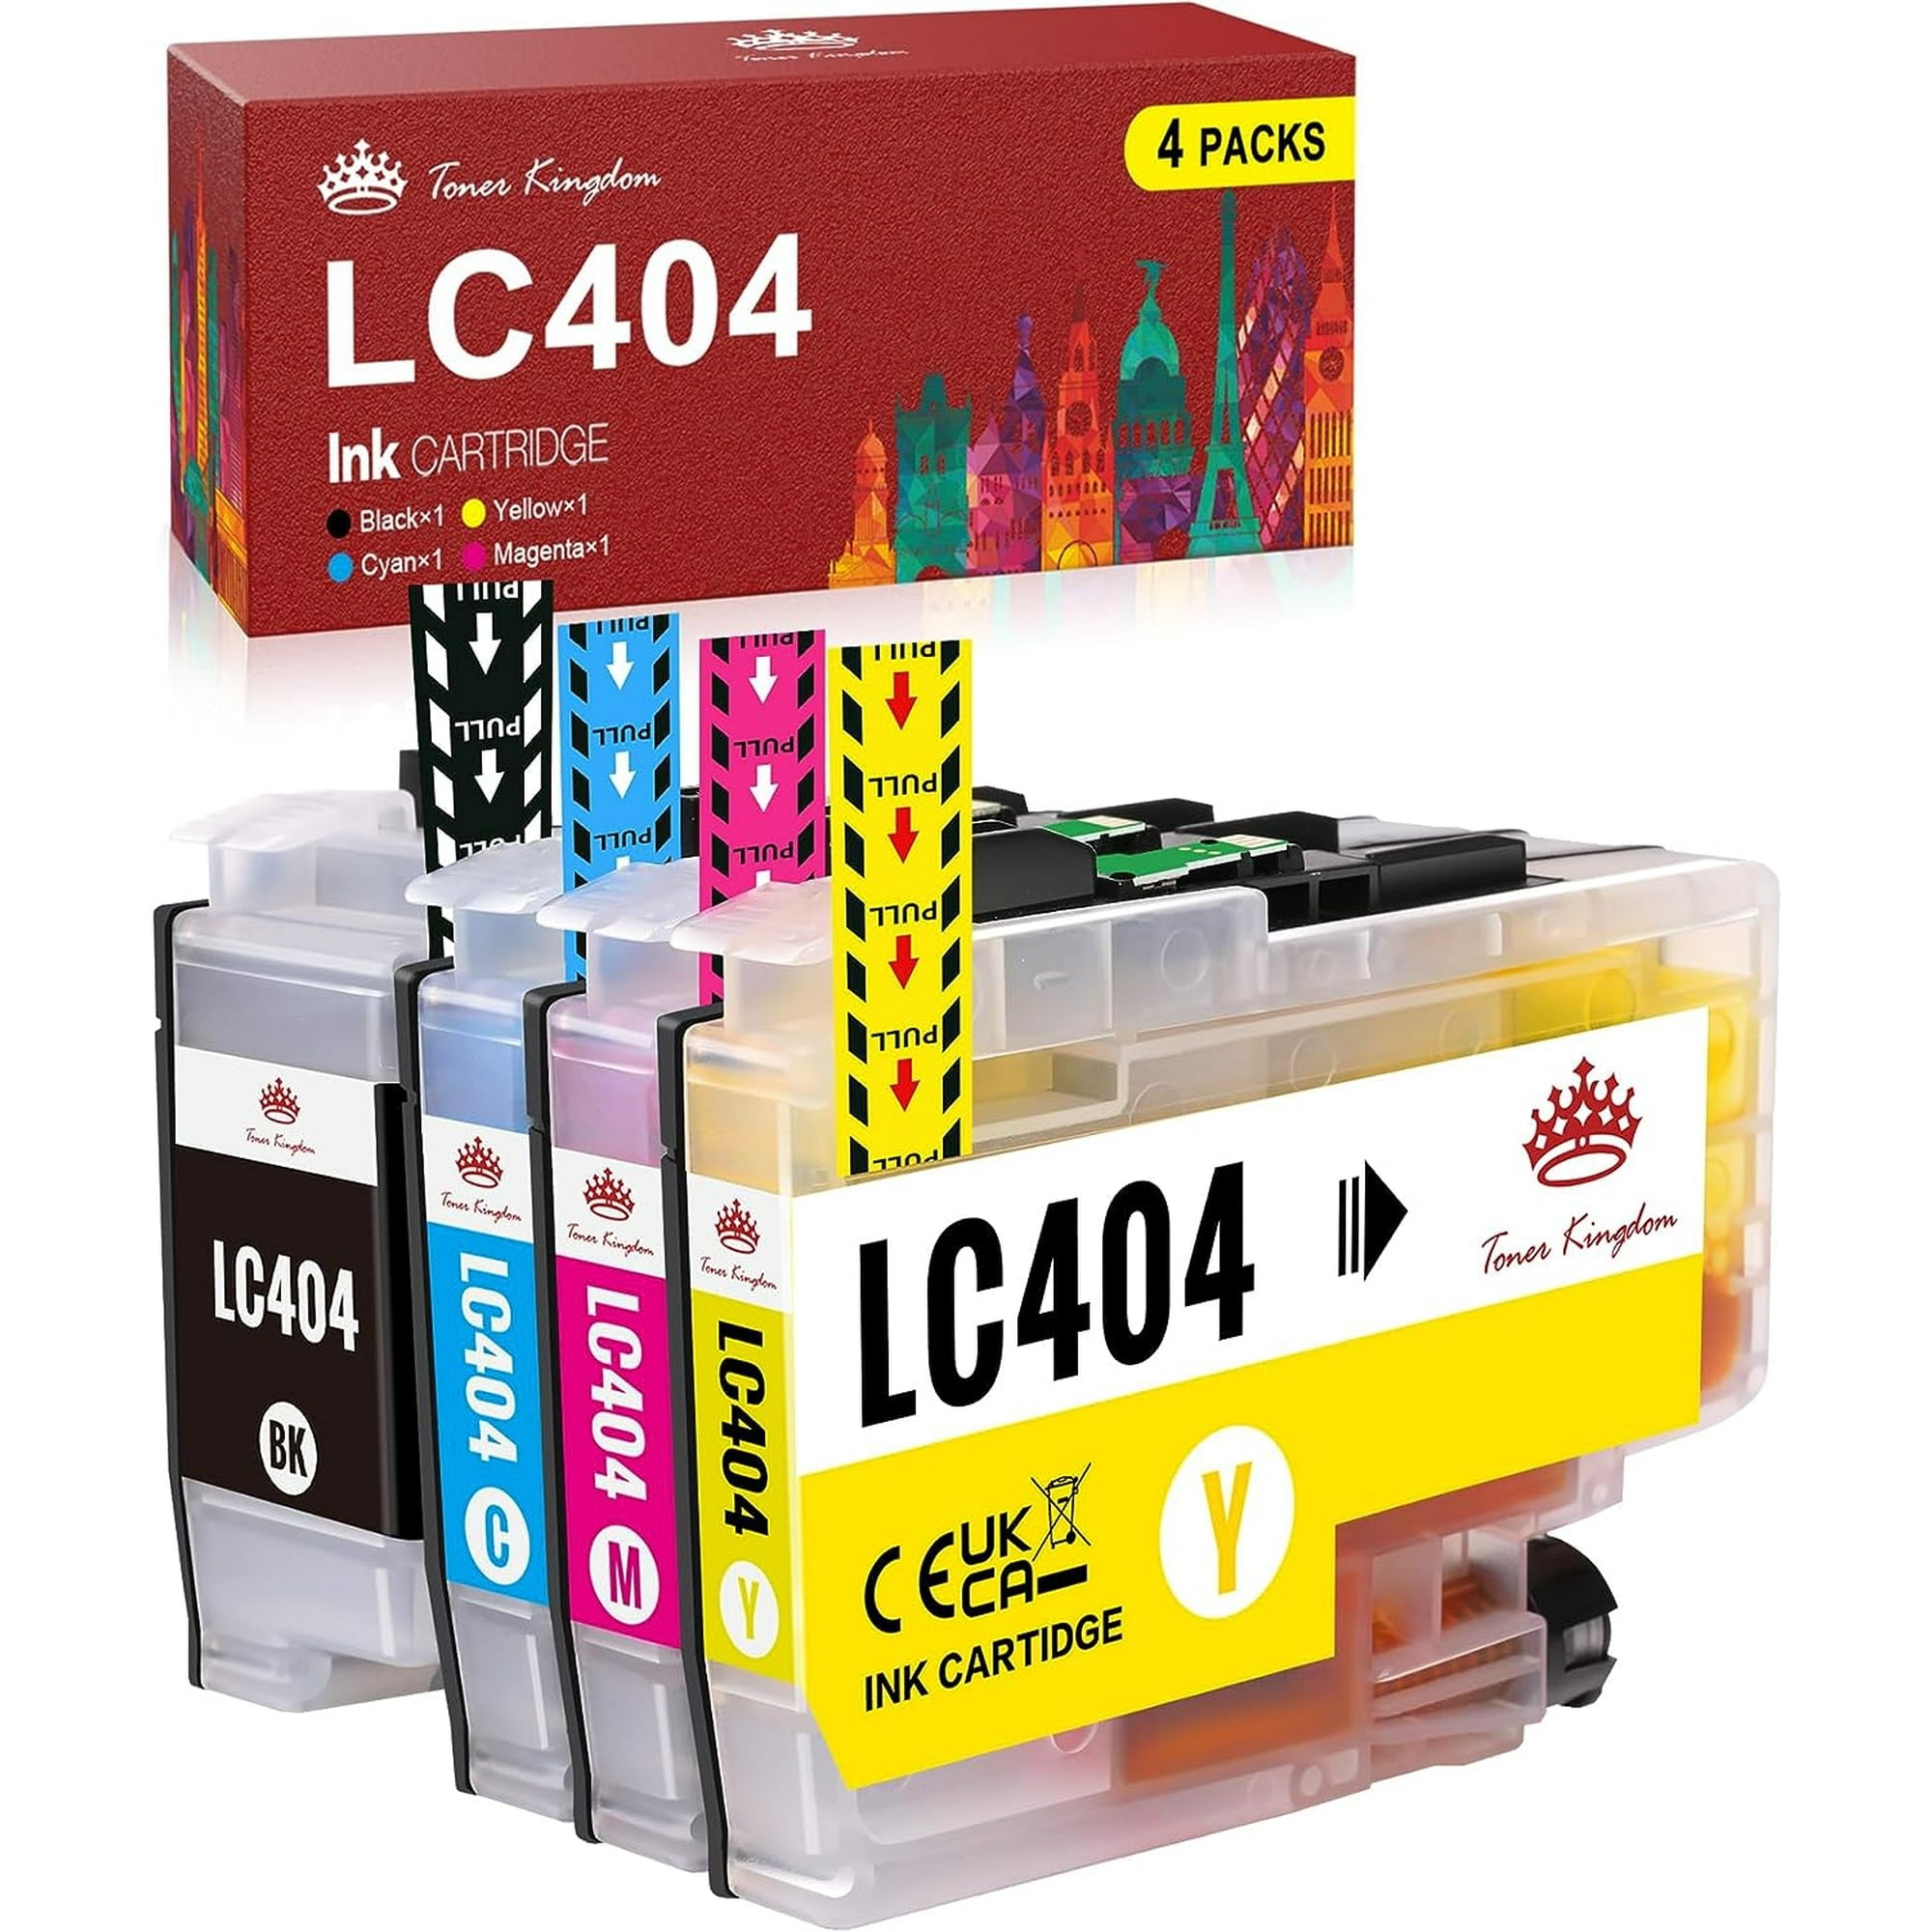 LC404 Ink Cartridge Toner Kingdom Compatible Ink Cartridge Replacement for Brother Printer 4 Pack